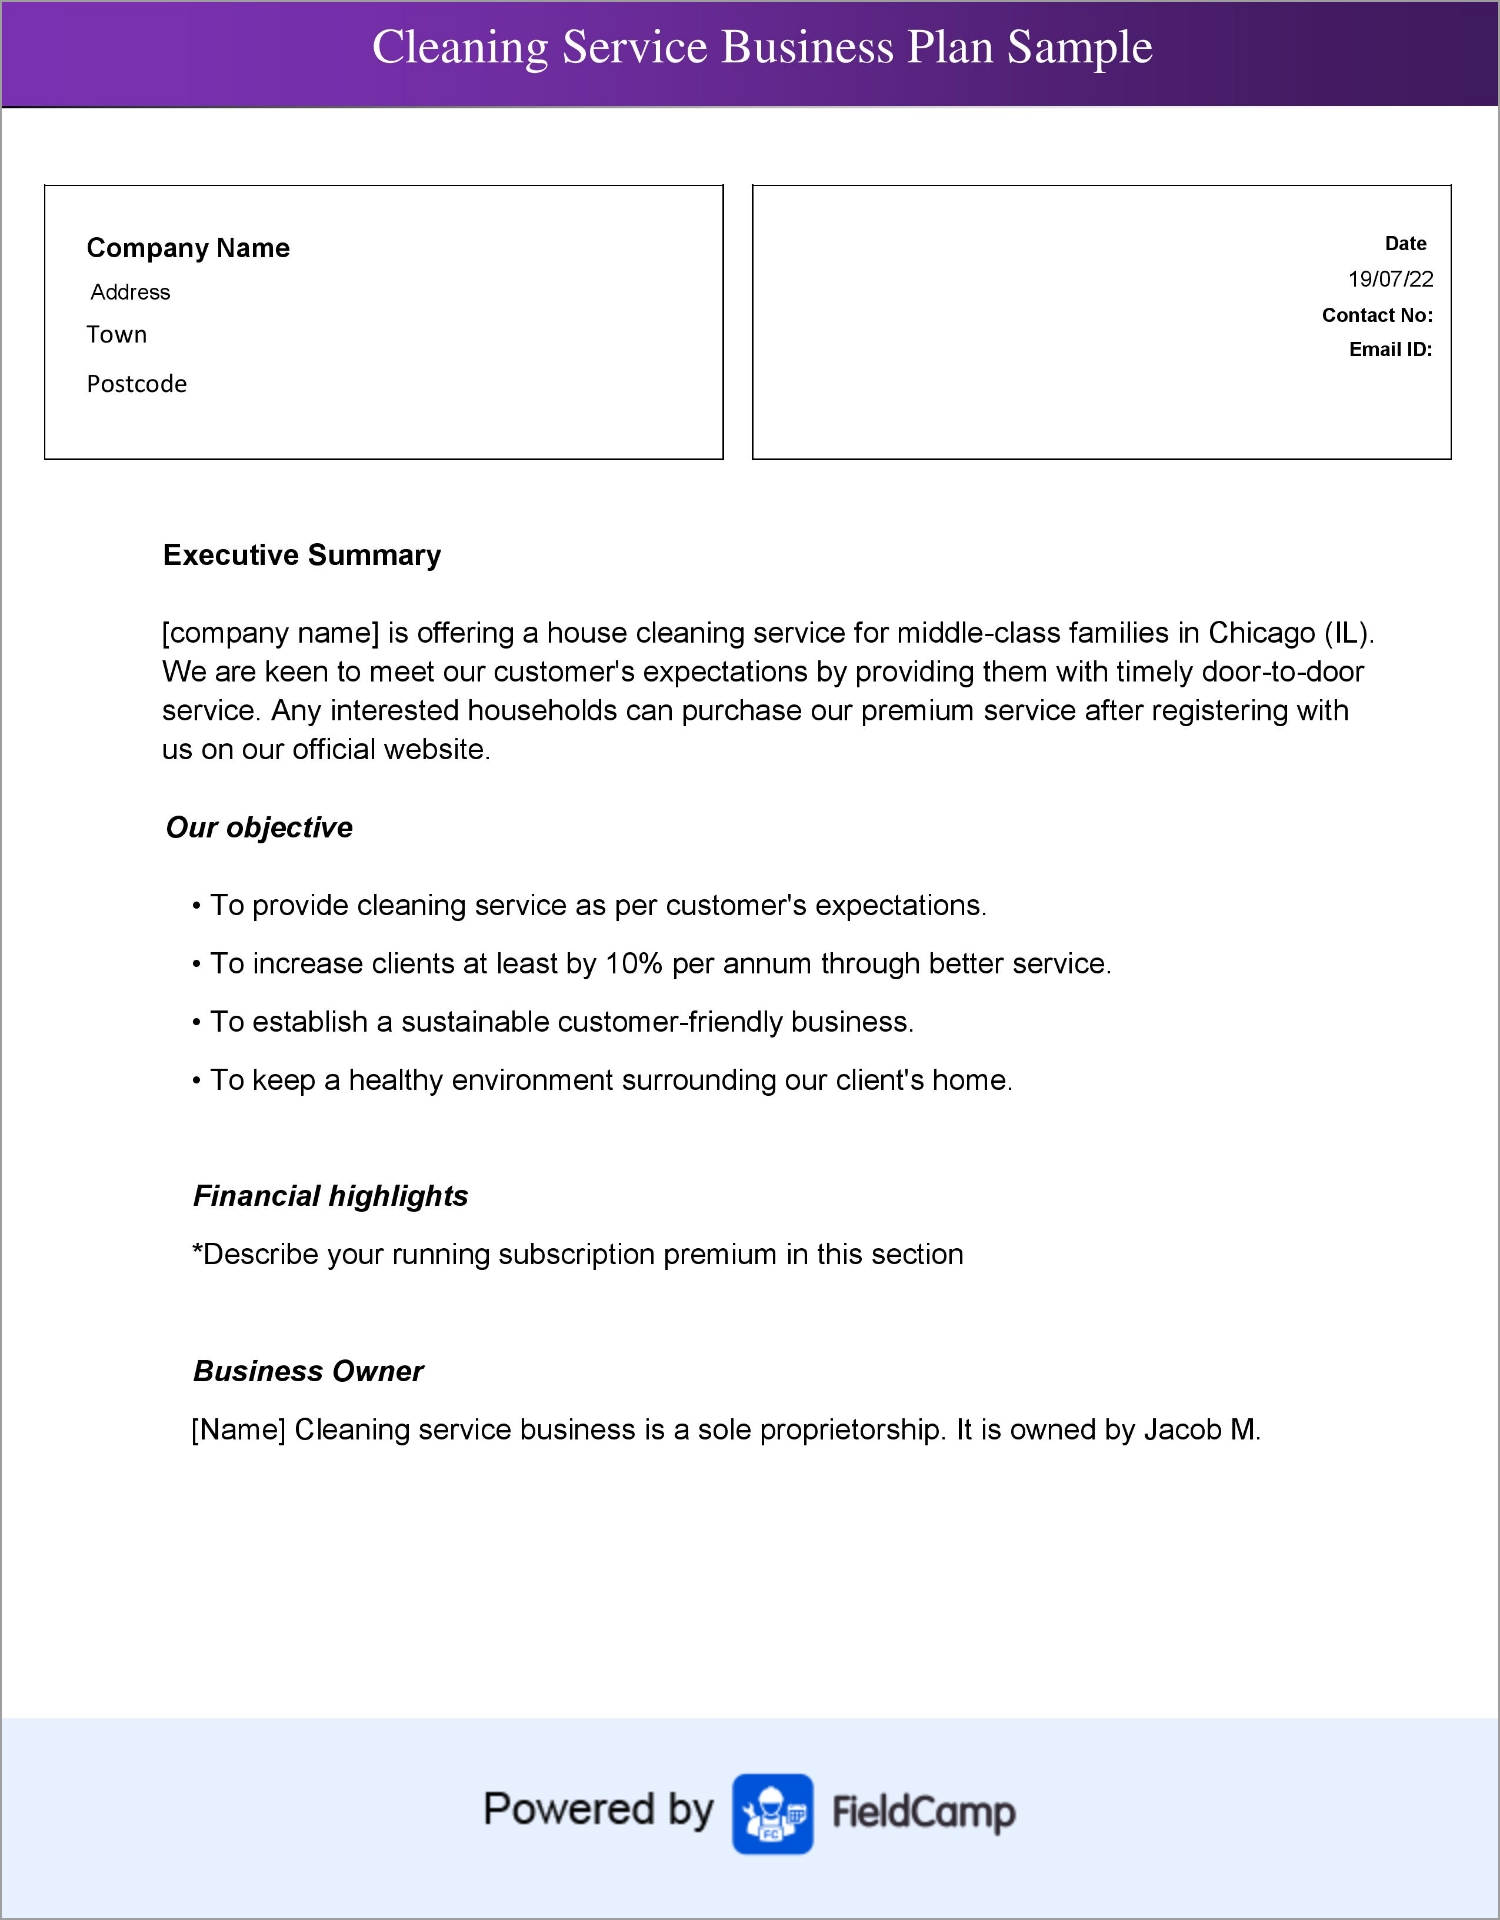 cleaning-service-business-plan-sample